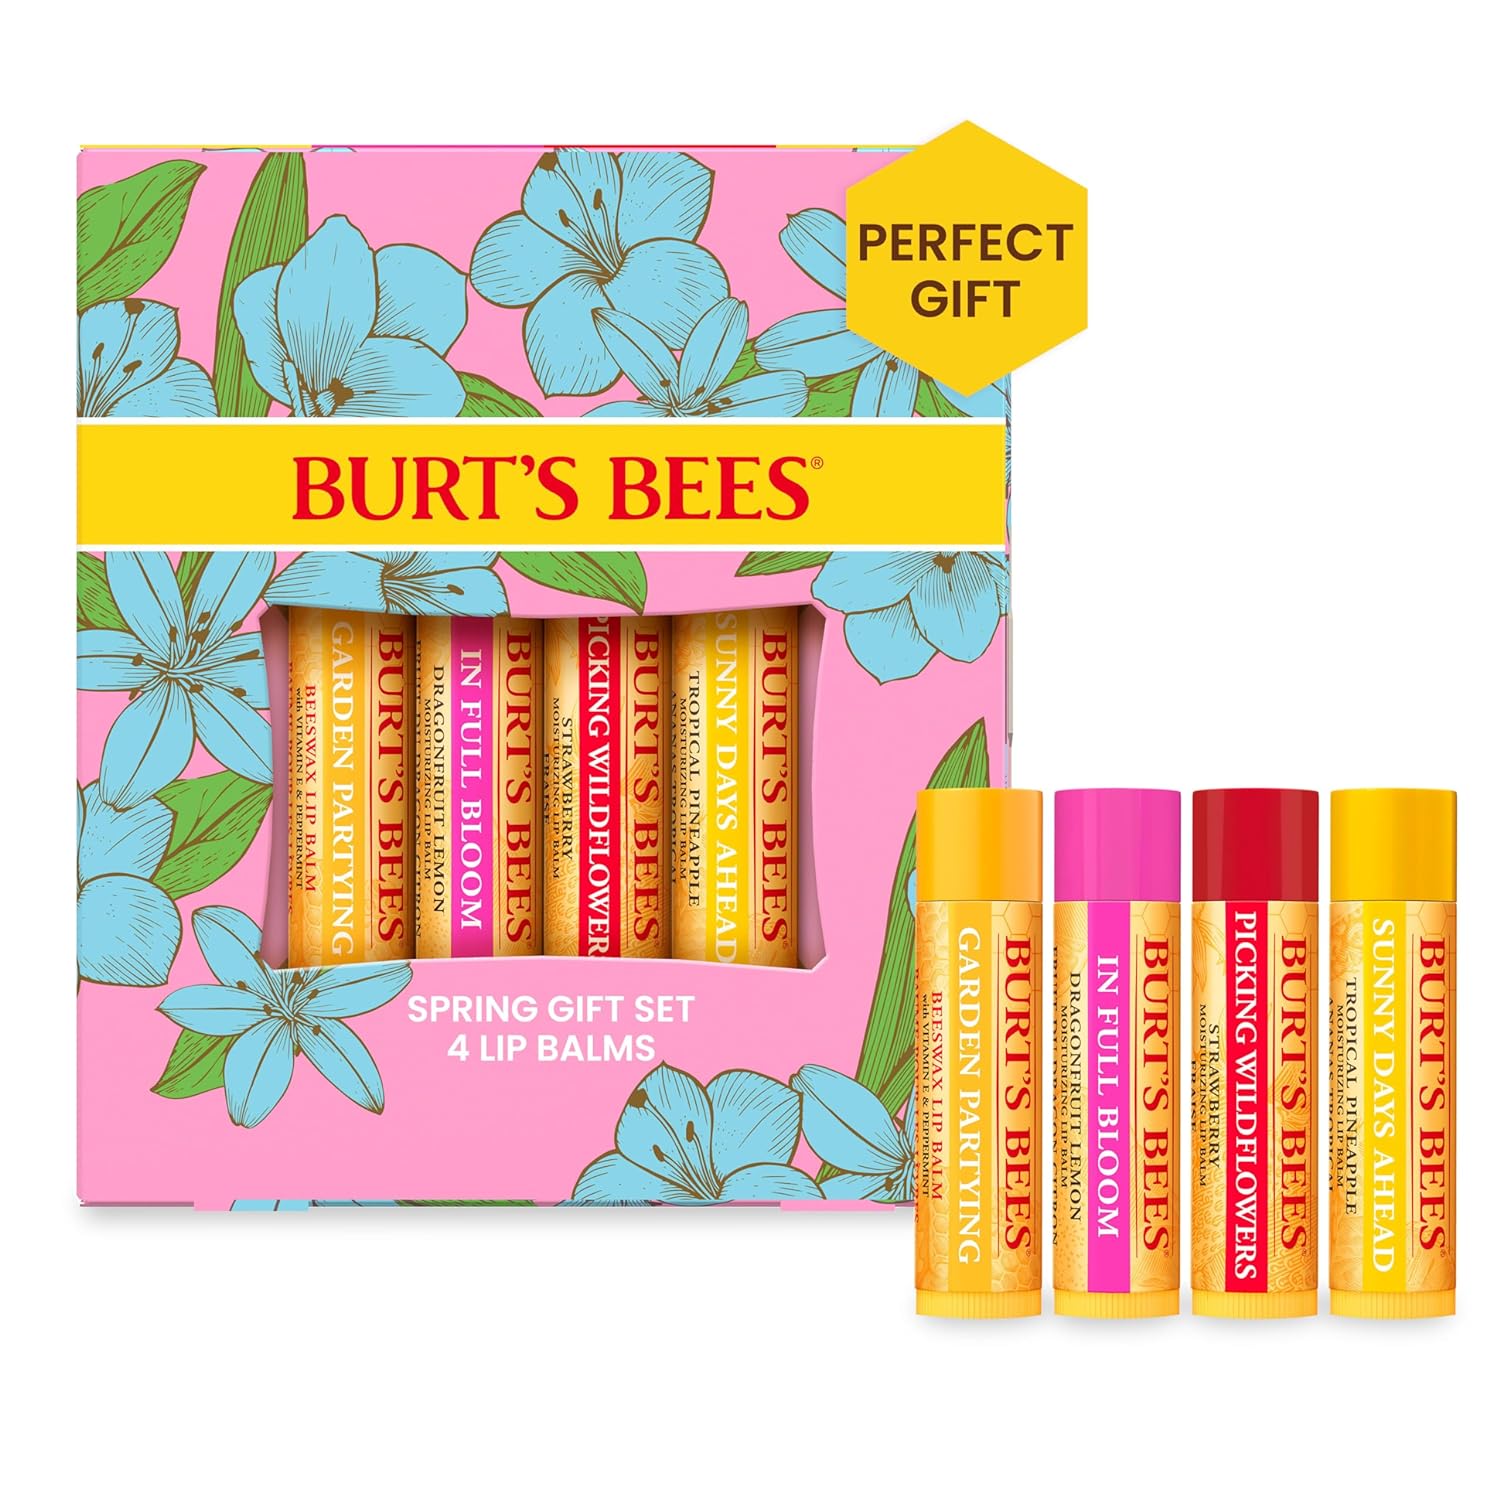 Burt's Bees Lip Balm Mothers Day Gifts for Mom - In Full Bloom Set, Original Beeswax, Dragonfruit Lemon, Tropical Pineapple & Strawberry, Natural Origin Lip Treatment With Beeswax, 4 Tubes, 0.15 oz